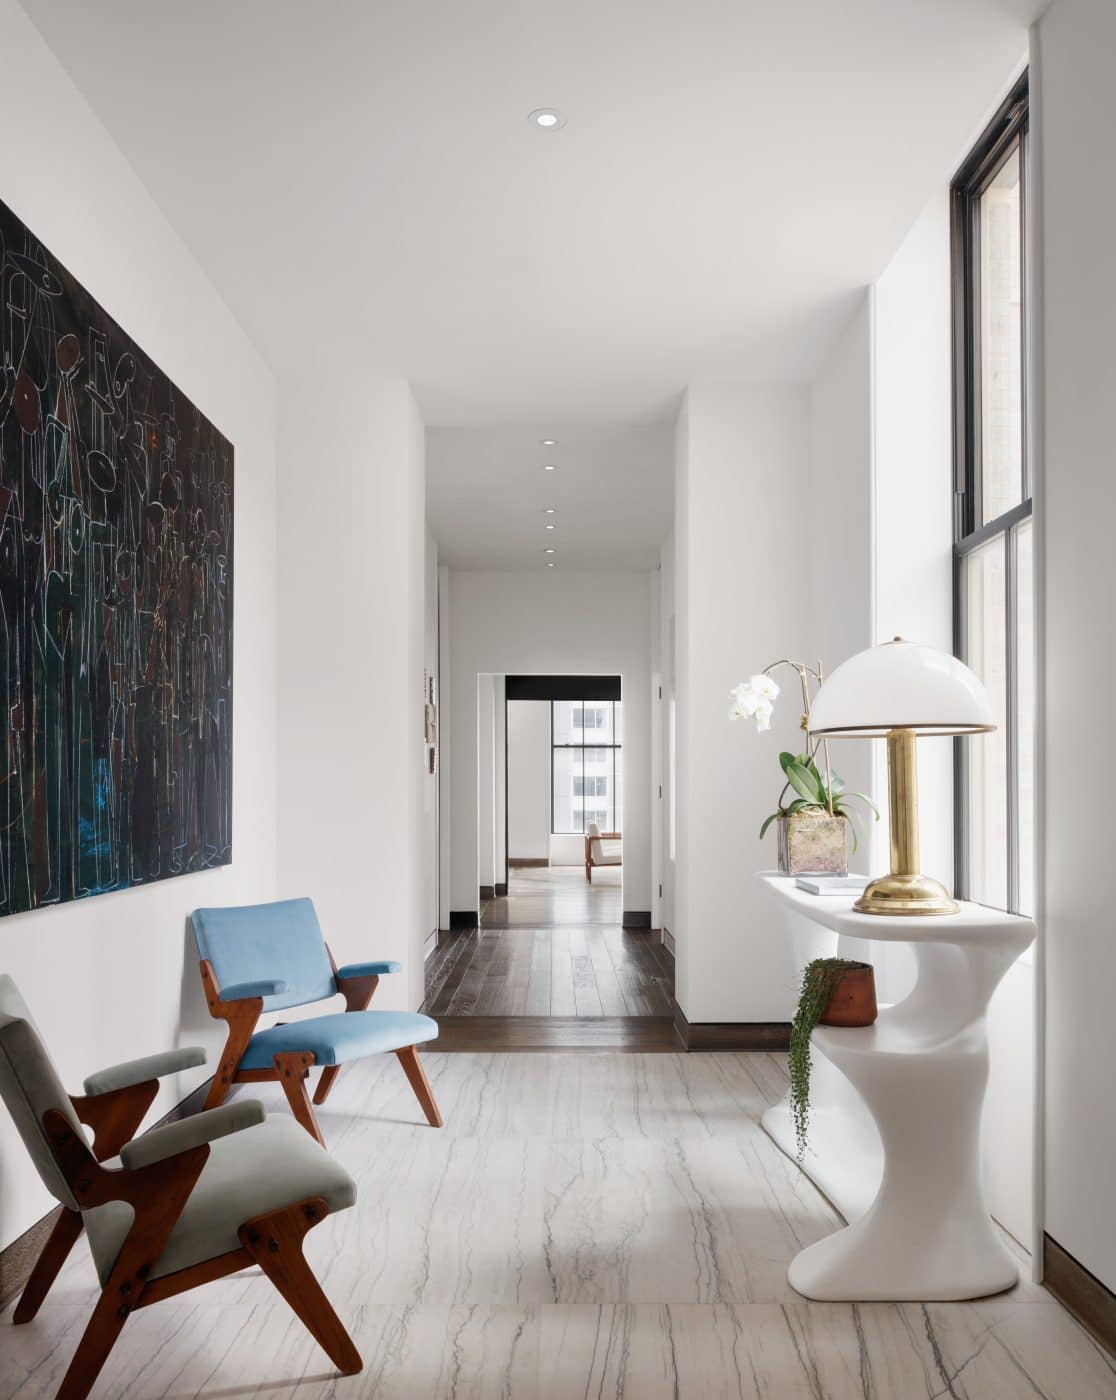 Gabriel and Excoffier's New York space